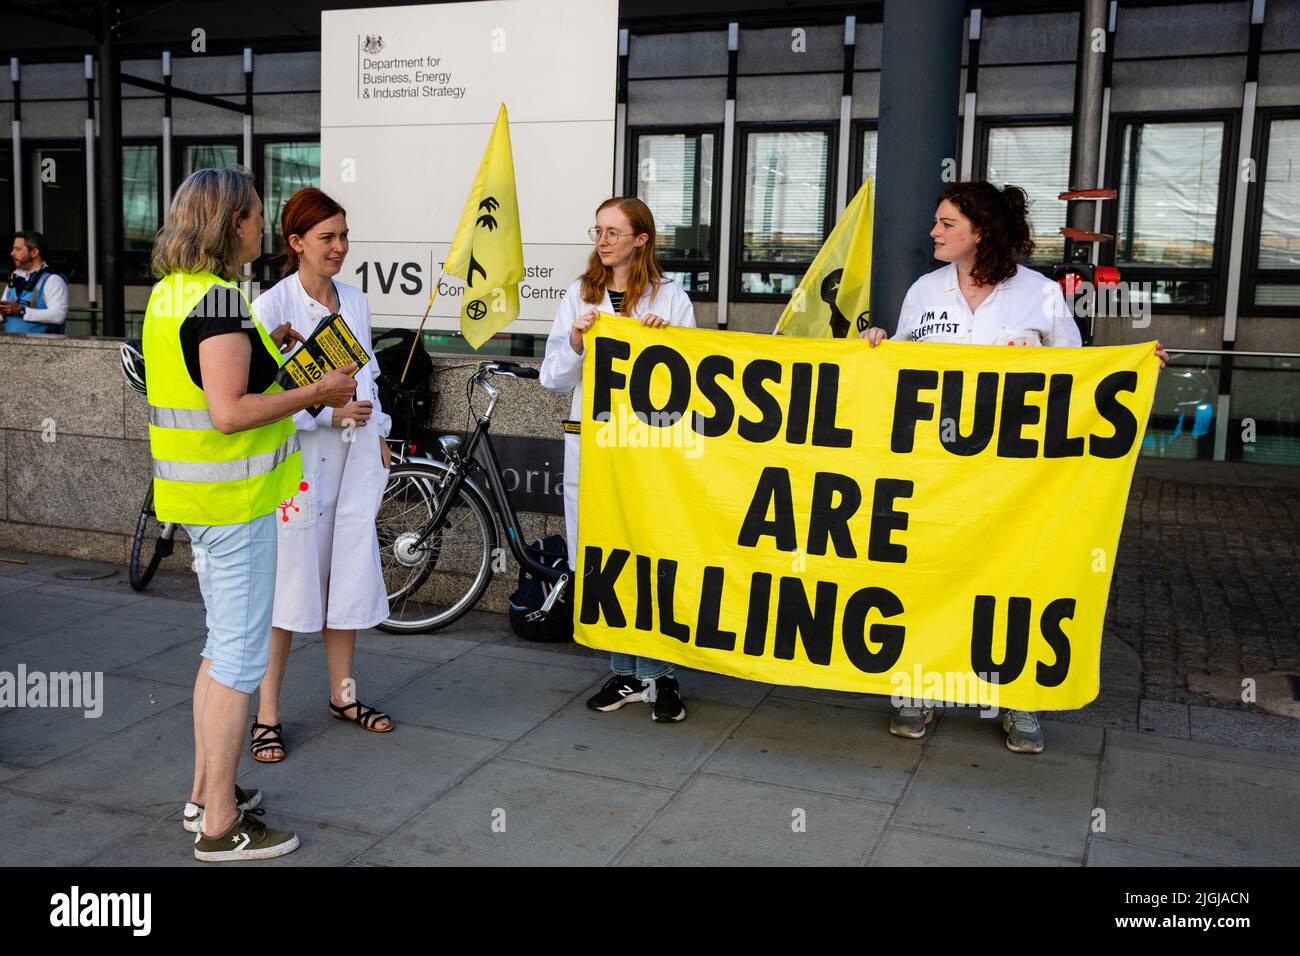 London, UK. 11th July, 2022. Climate activists from Extinction Rebellion protest outside the Department for Business, Energy and Industrial Strategy (BEIS) as part of a Stop Coal tour. The activists are calling for no licences or planning consents to be granted for coal extraction by the Coal Authority, an executive non-departmental public body sponsored by BEIS, anywhere in the UK. Credit: Mark Kerrison/Alamy Live News Stock Photo